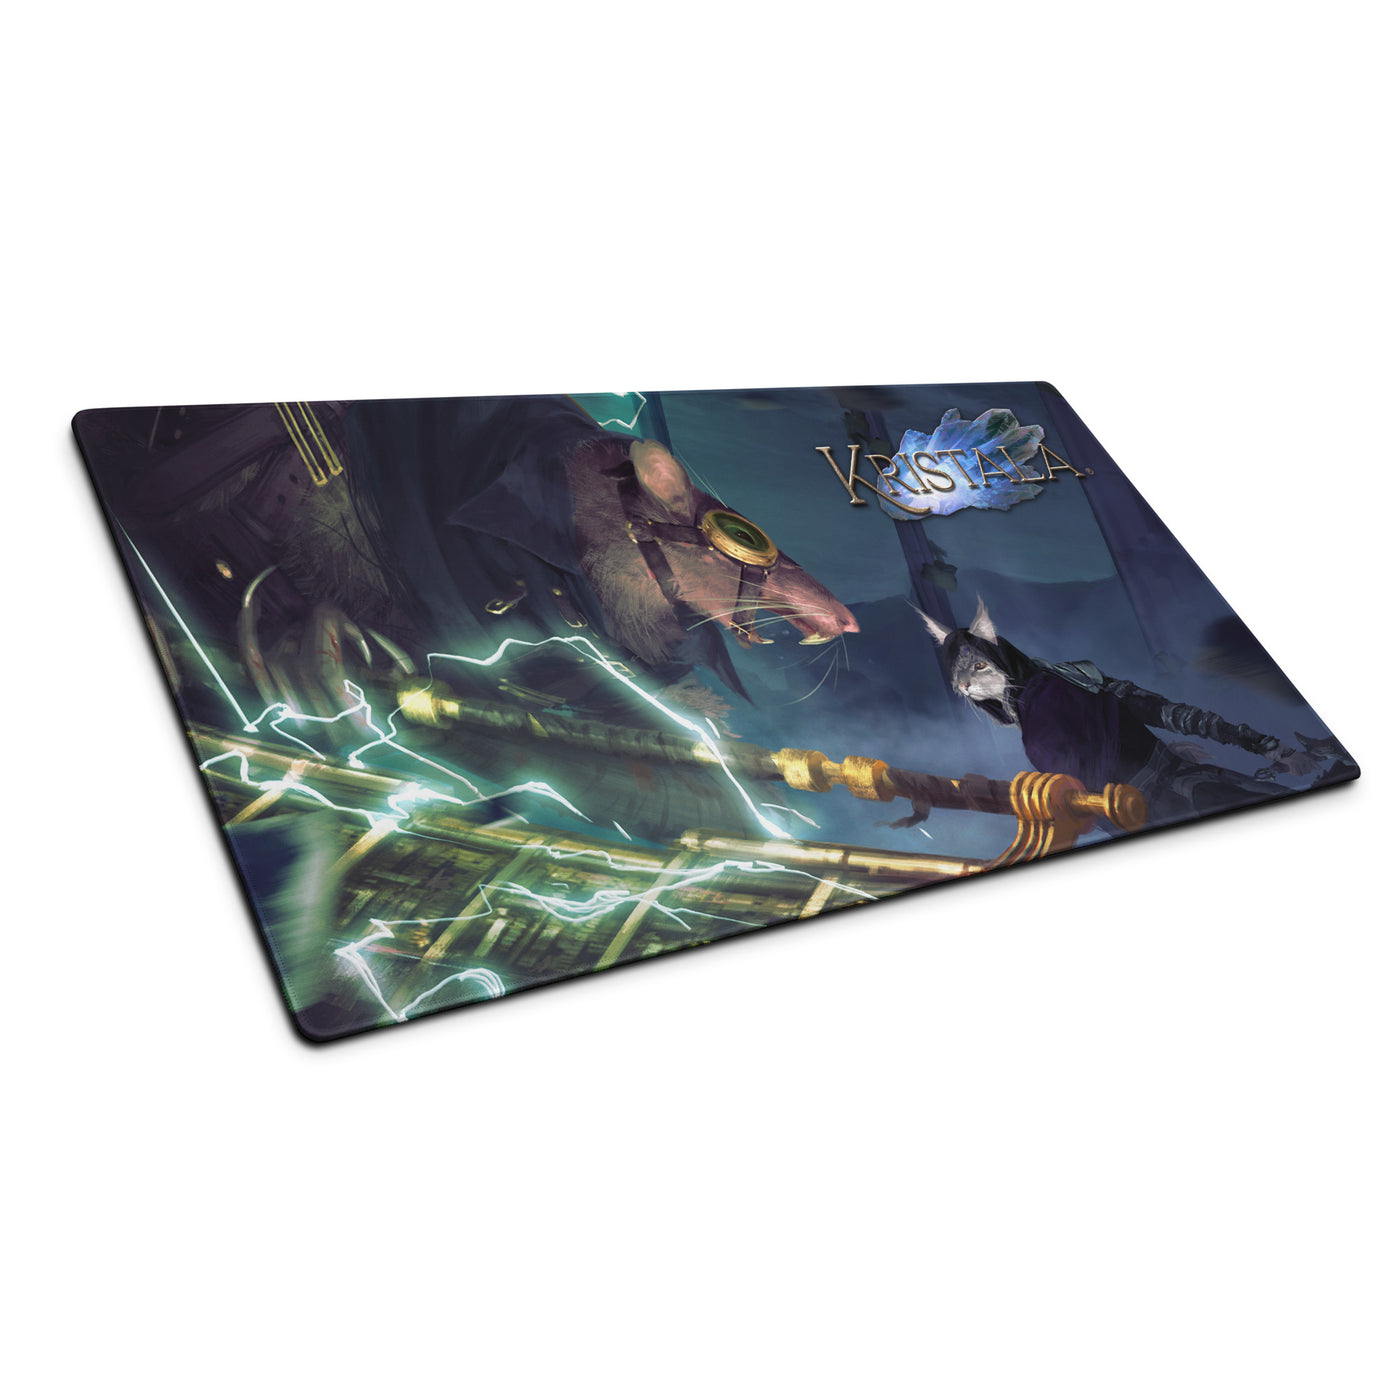 tilted front view of large, no-slip gaming mouse pad with kristala game dark fantasy illustration executioner boss fight graphic black mousepad base white background